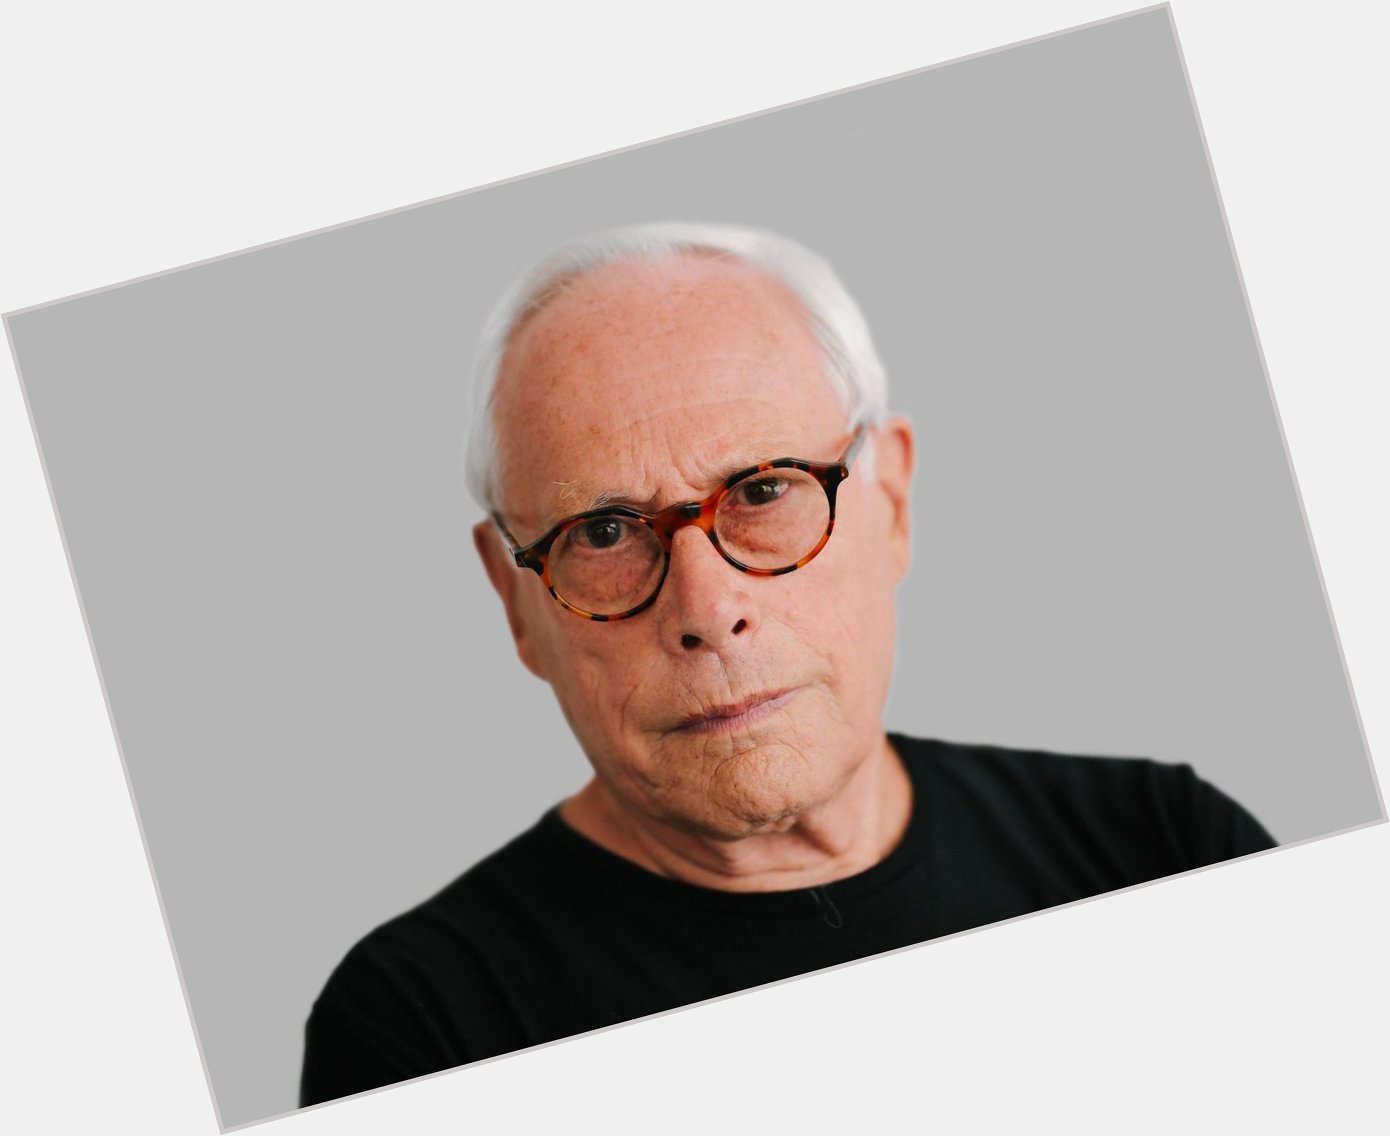 Wishing a very happy birthday to one of our most loved designers, Dieter Rams, who turns 85 today. All the best! 